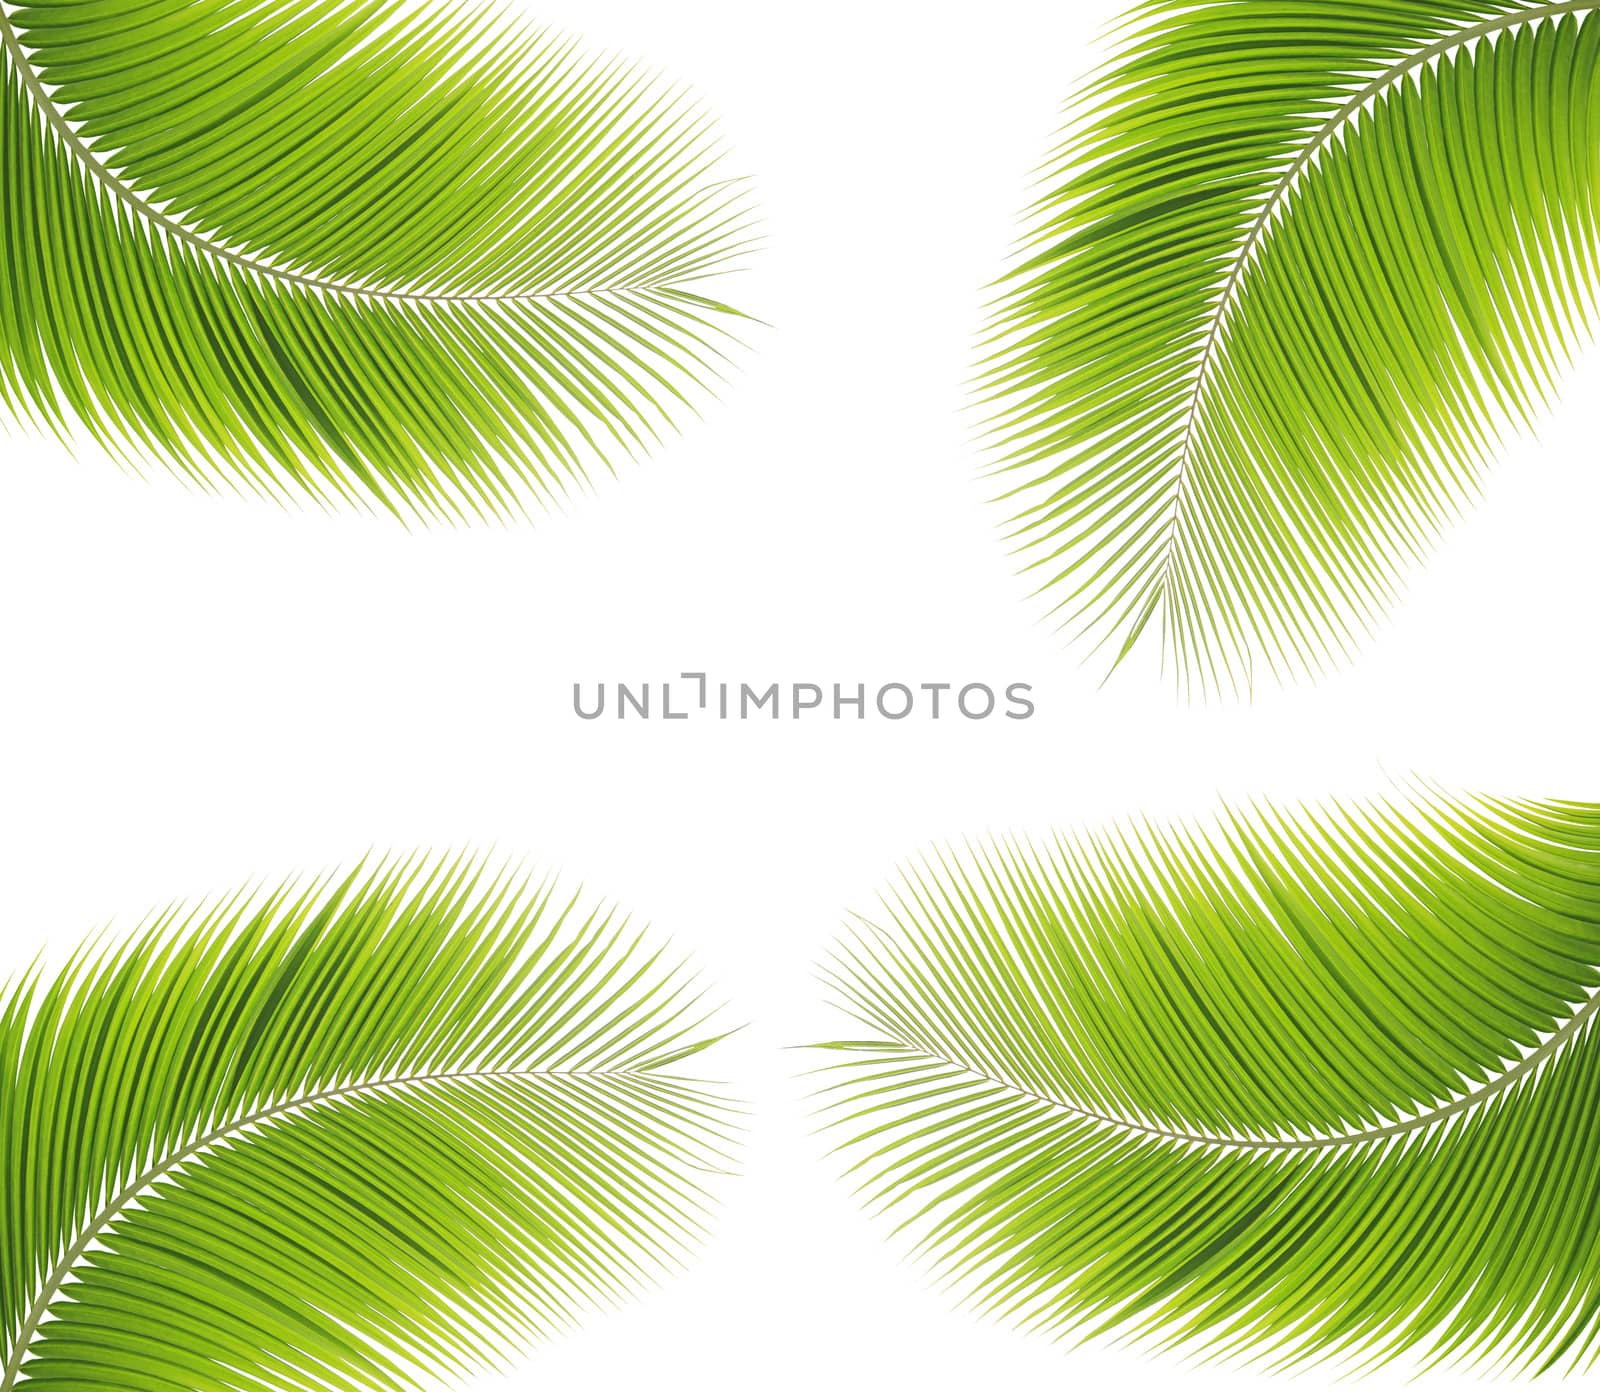 Green palm leaf isolated on white background by drpnncpp